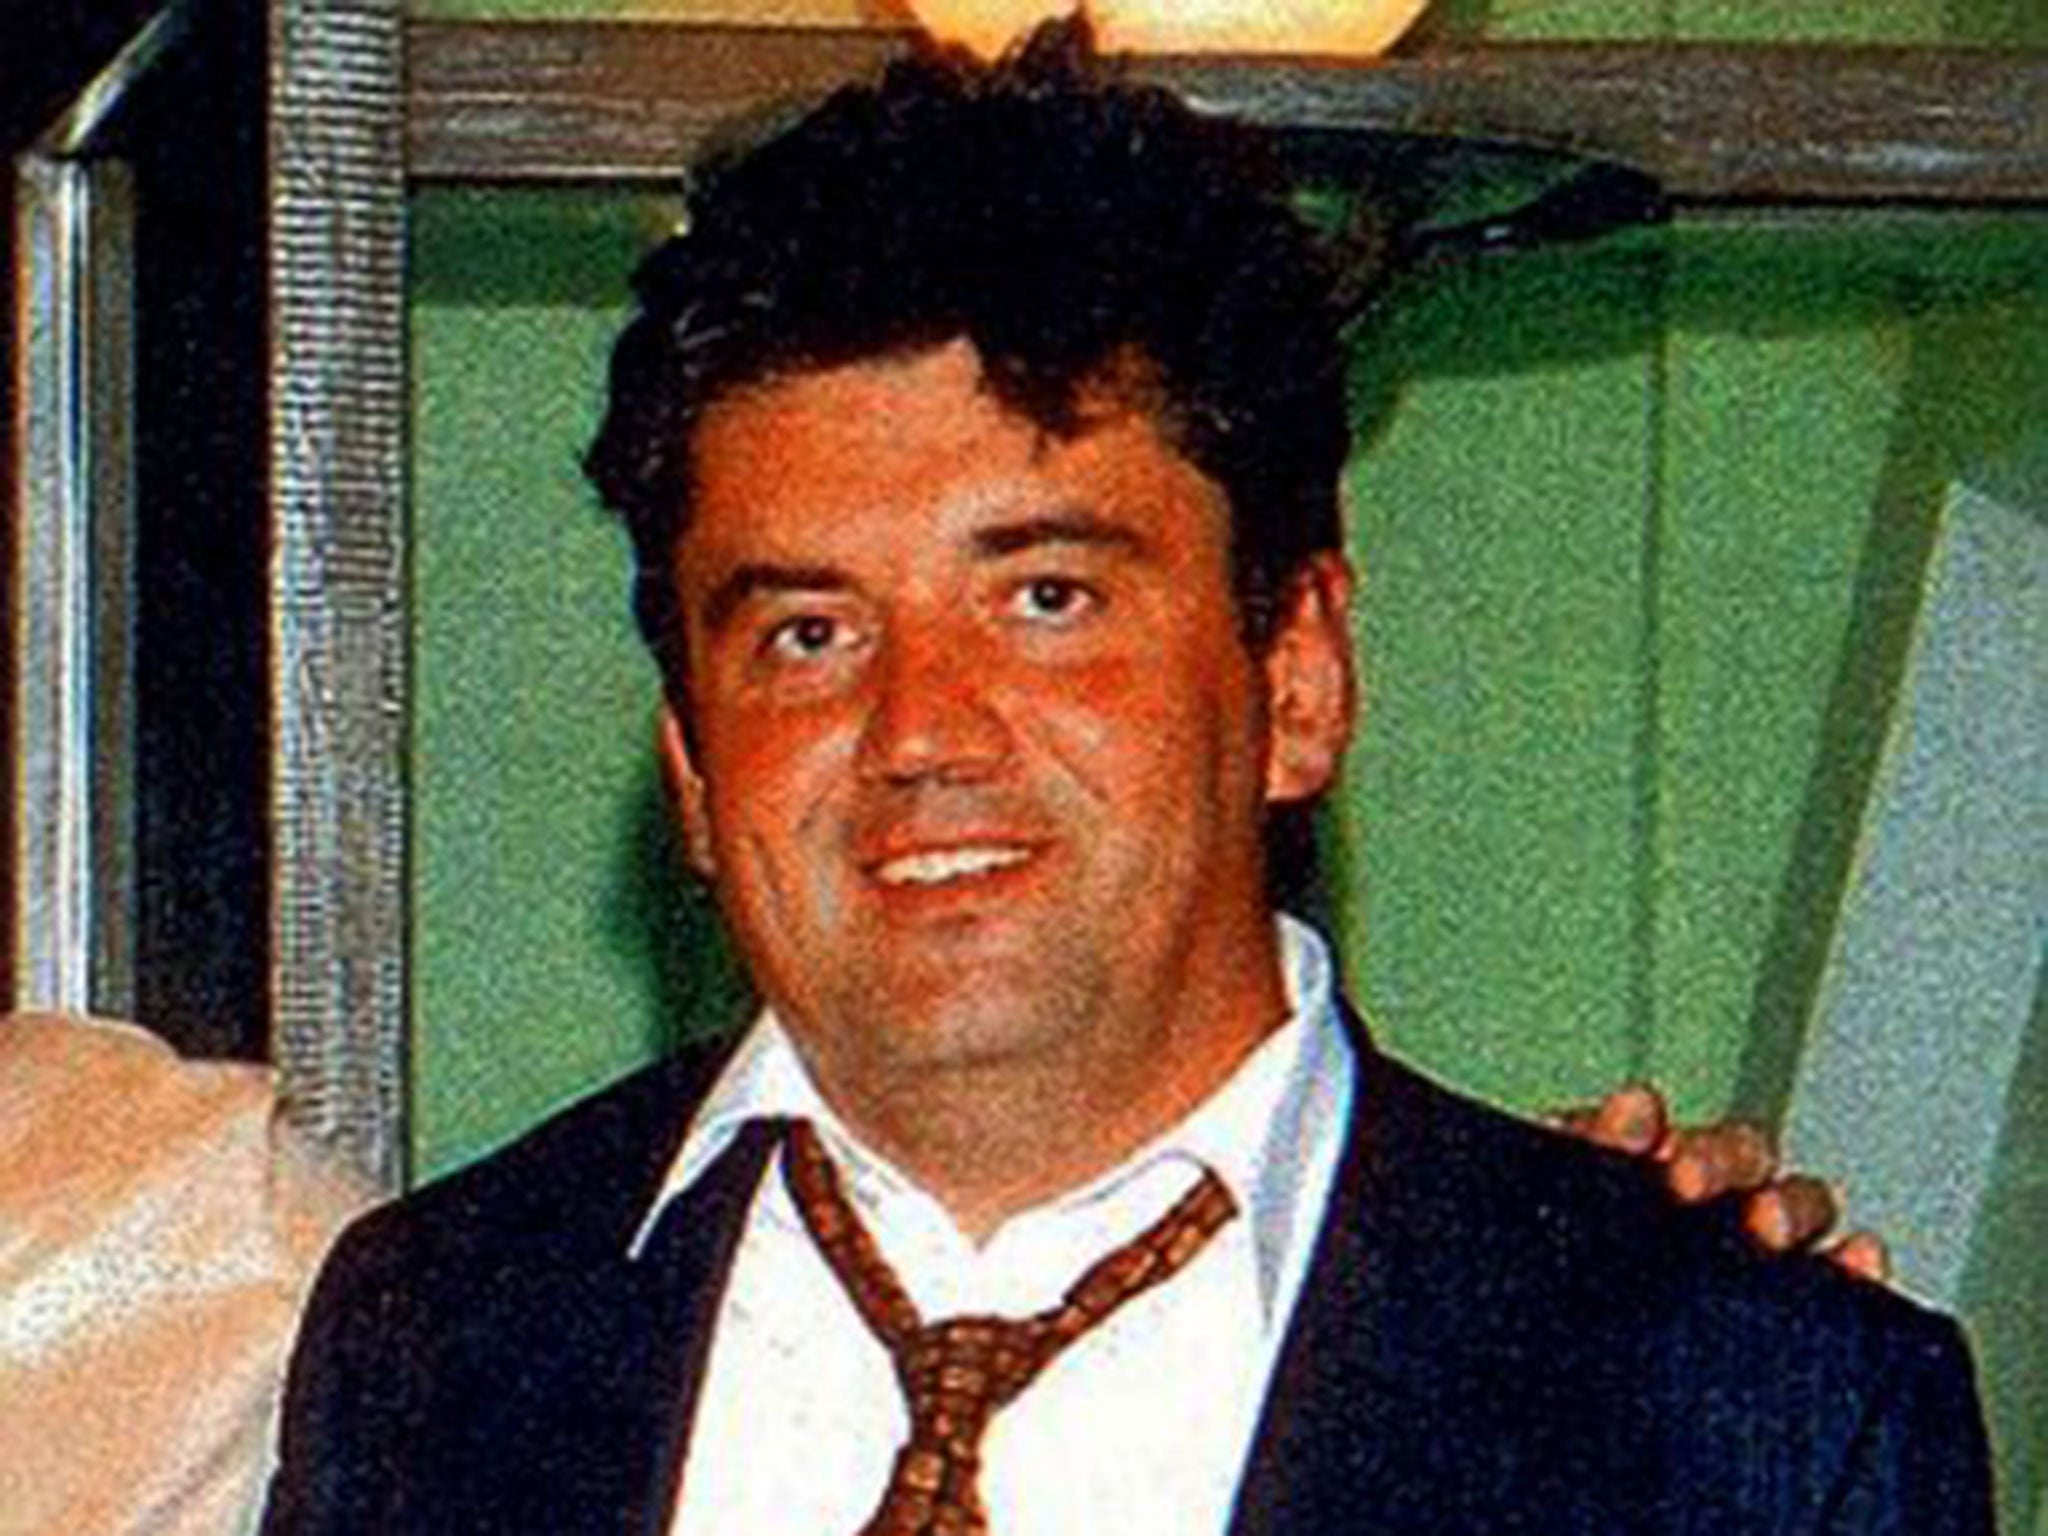 Alexander Perepilichny died while jogging in 2012